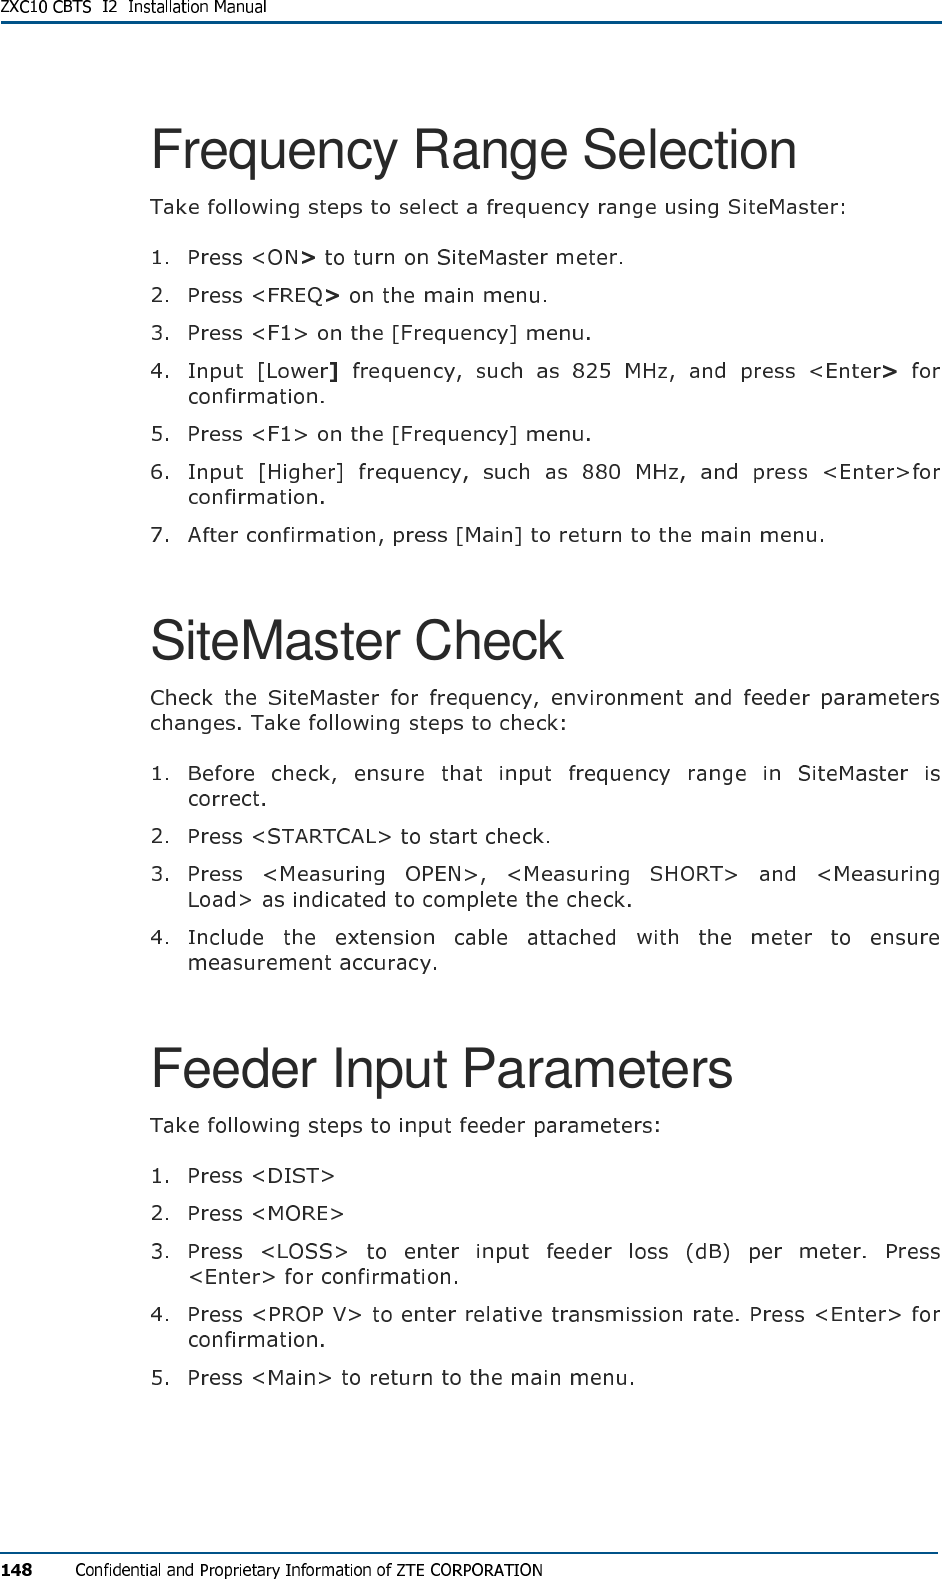 Frequency Range Selection        SiteMaster Check     Feeder Input Parameters      